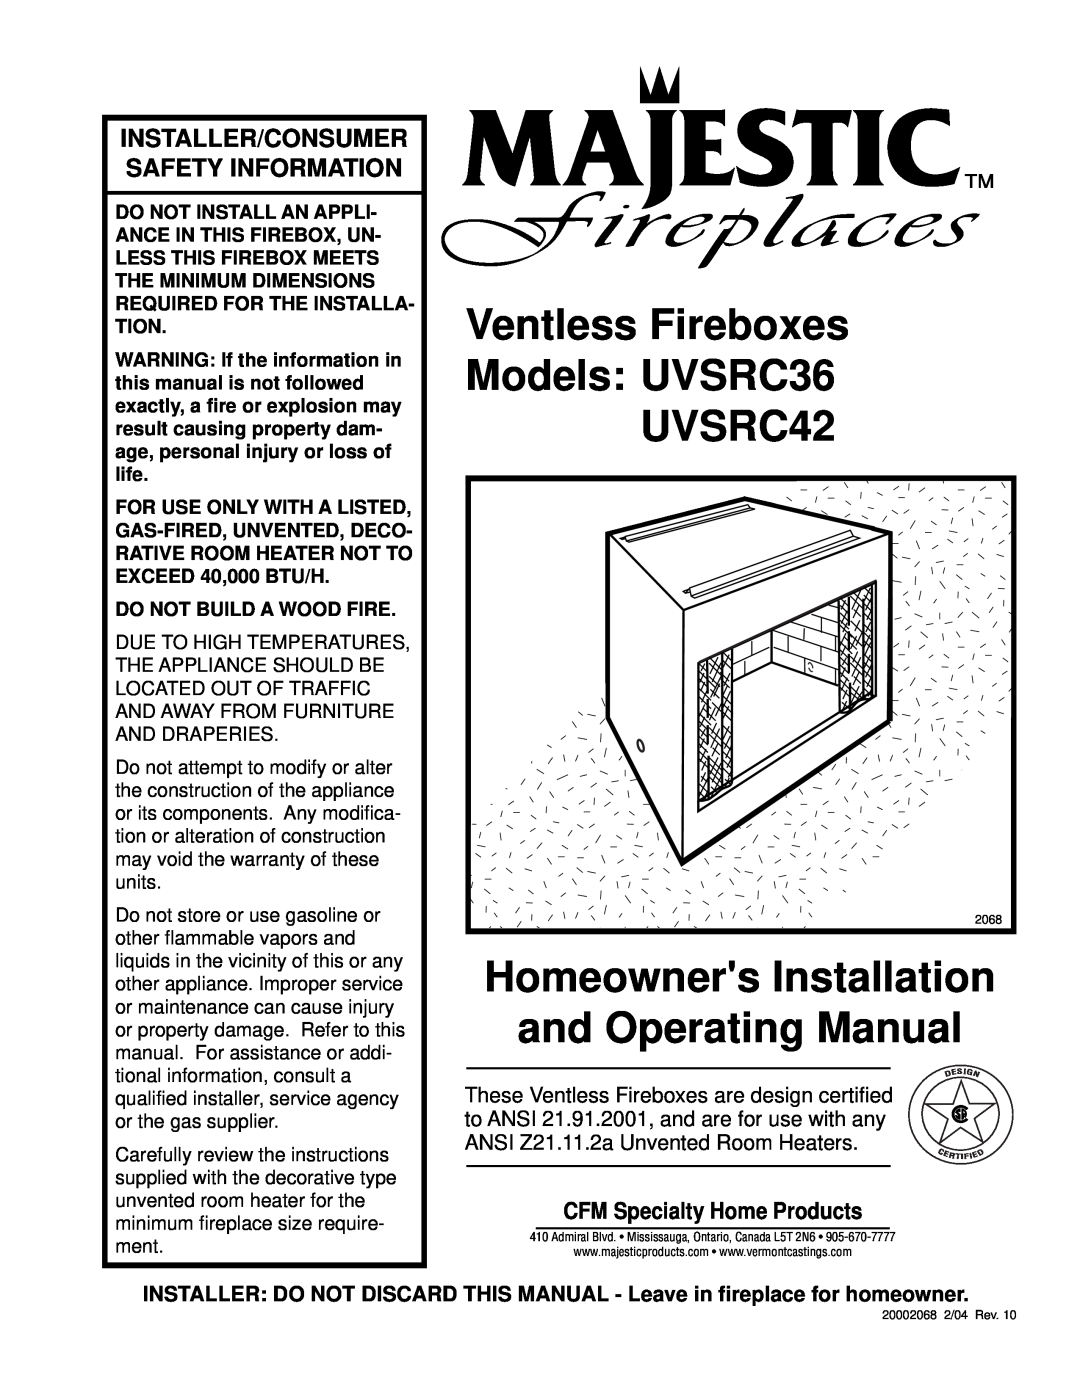 Majestic Appliances dimensions Ventless Fireboxes Models UVSRC36 UVSRC42, Homeowners Installation and Operating Manual 